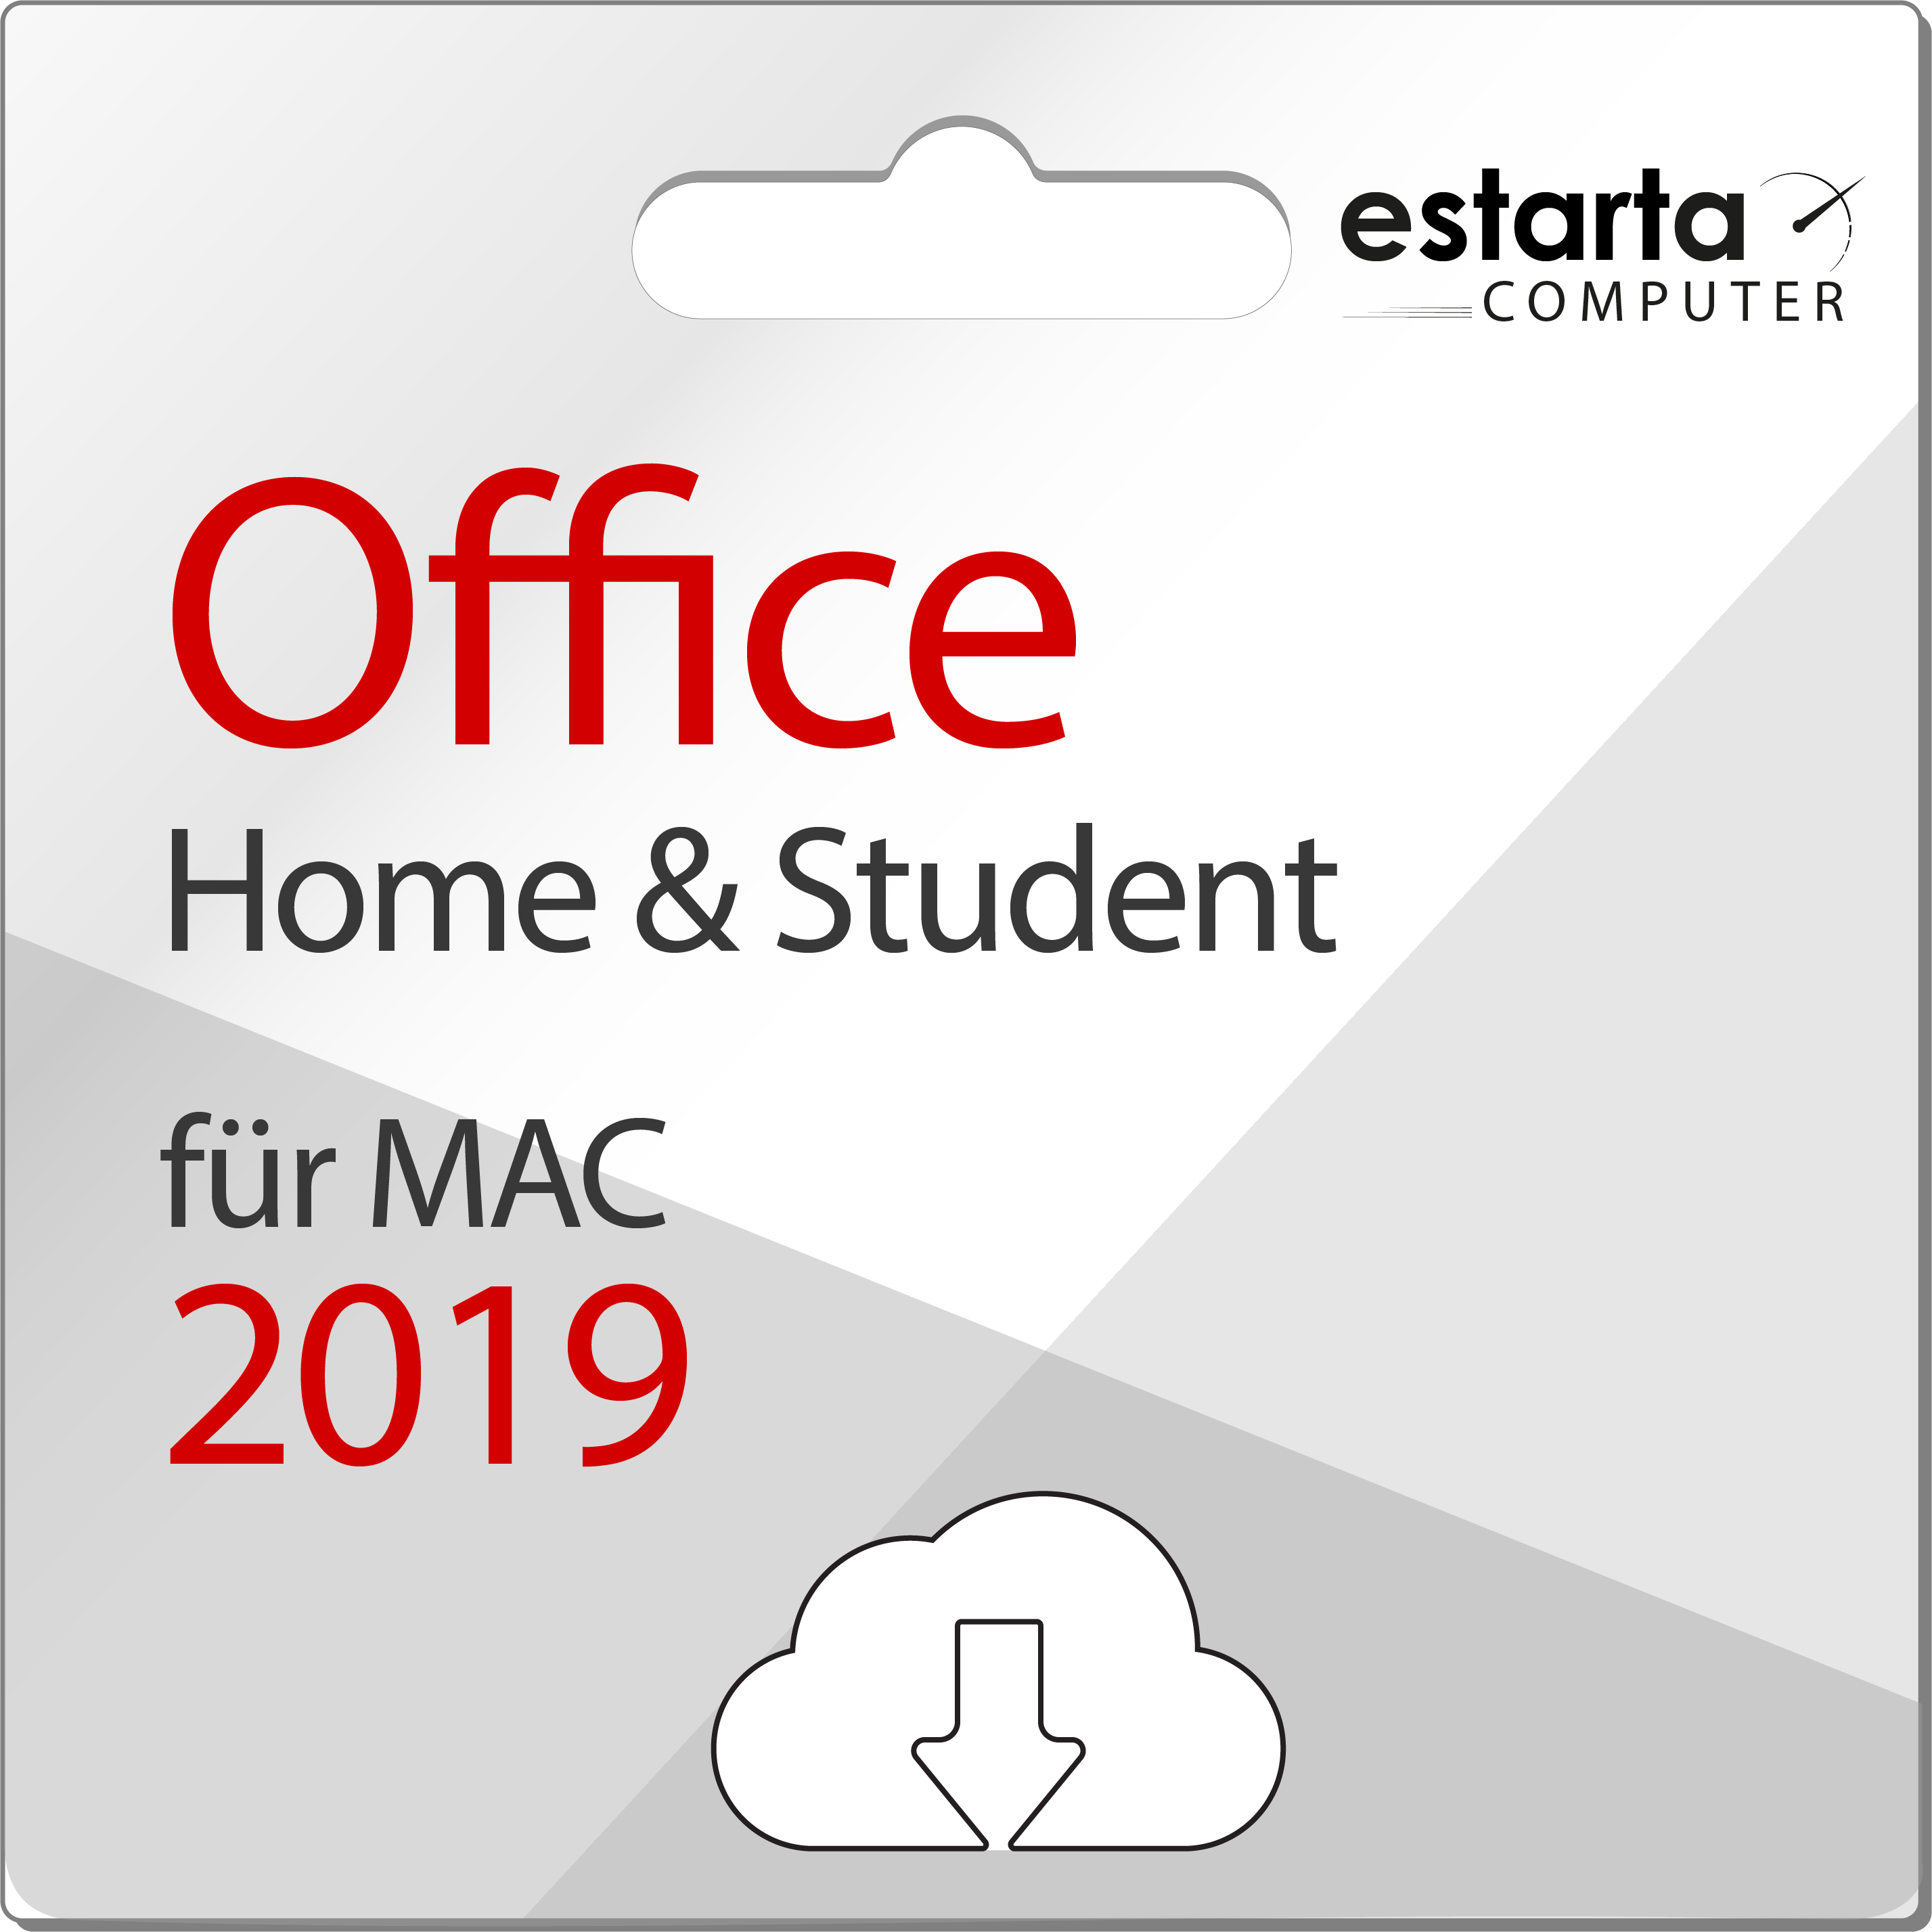 Buy Microsoft Office Mac 2019 Home &amp; Student Online as a download